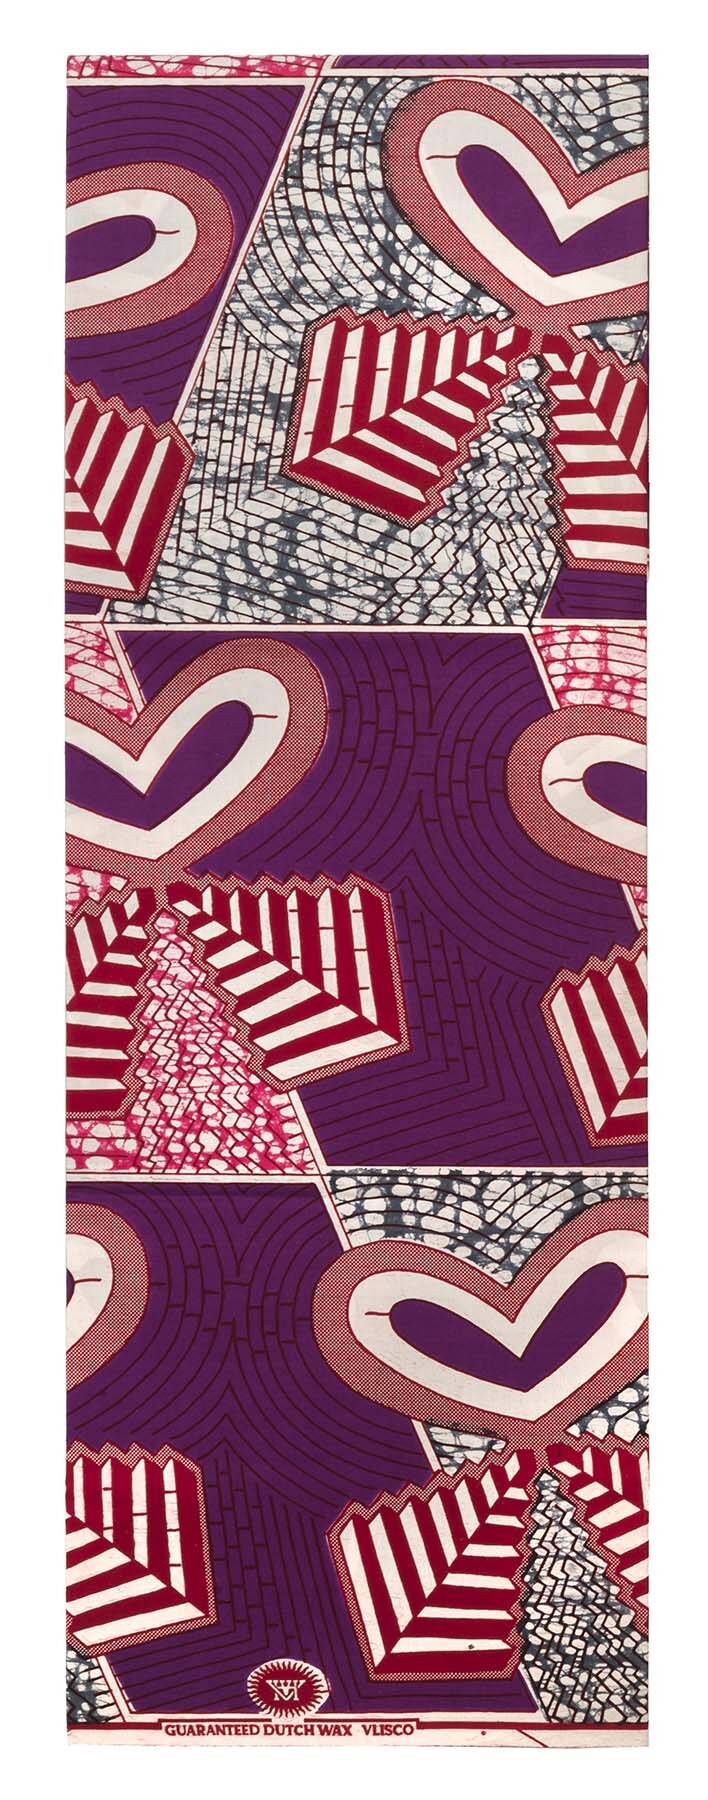 Heart of Barack, introduced 2007, manufactured by Vlisco, Netherlands; Dutch Super Wax on cotton, 48 x 12 inches.